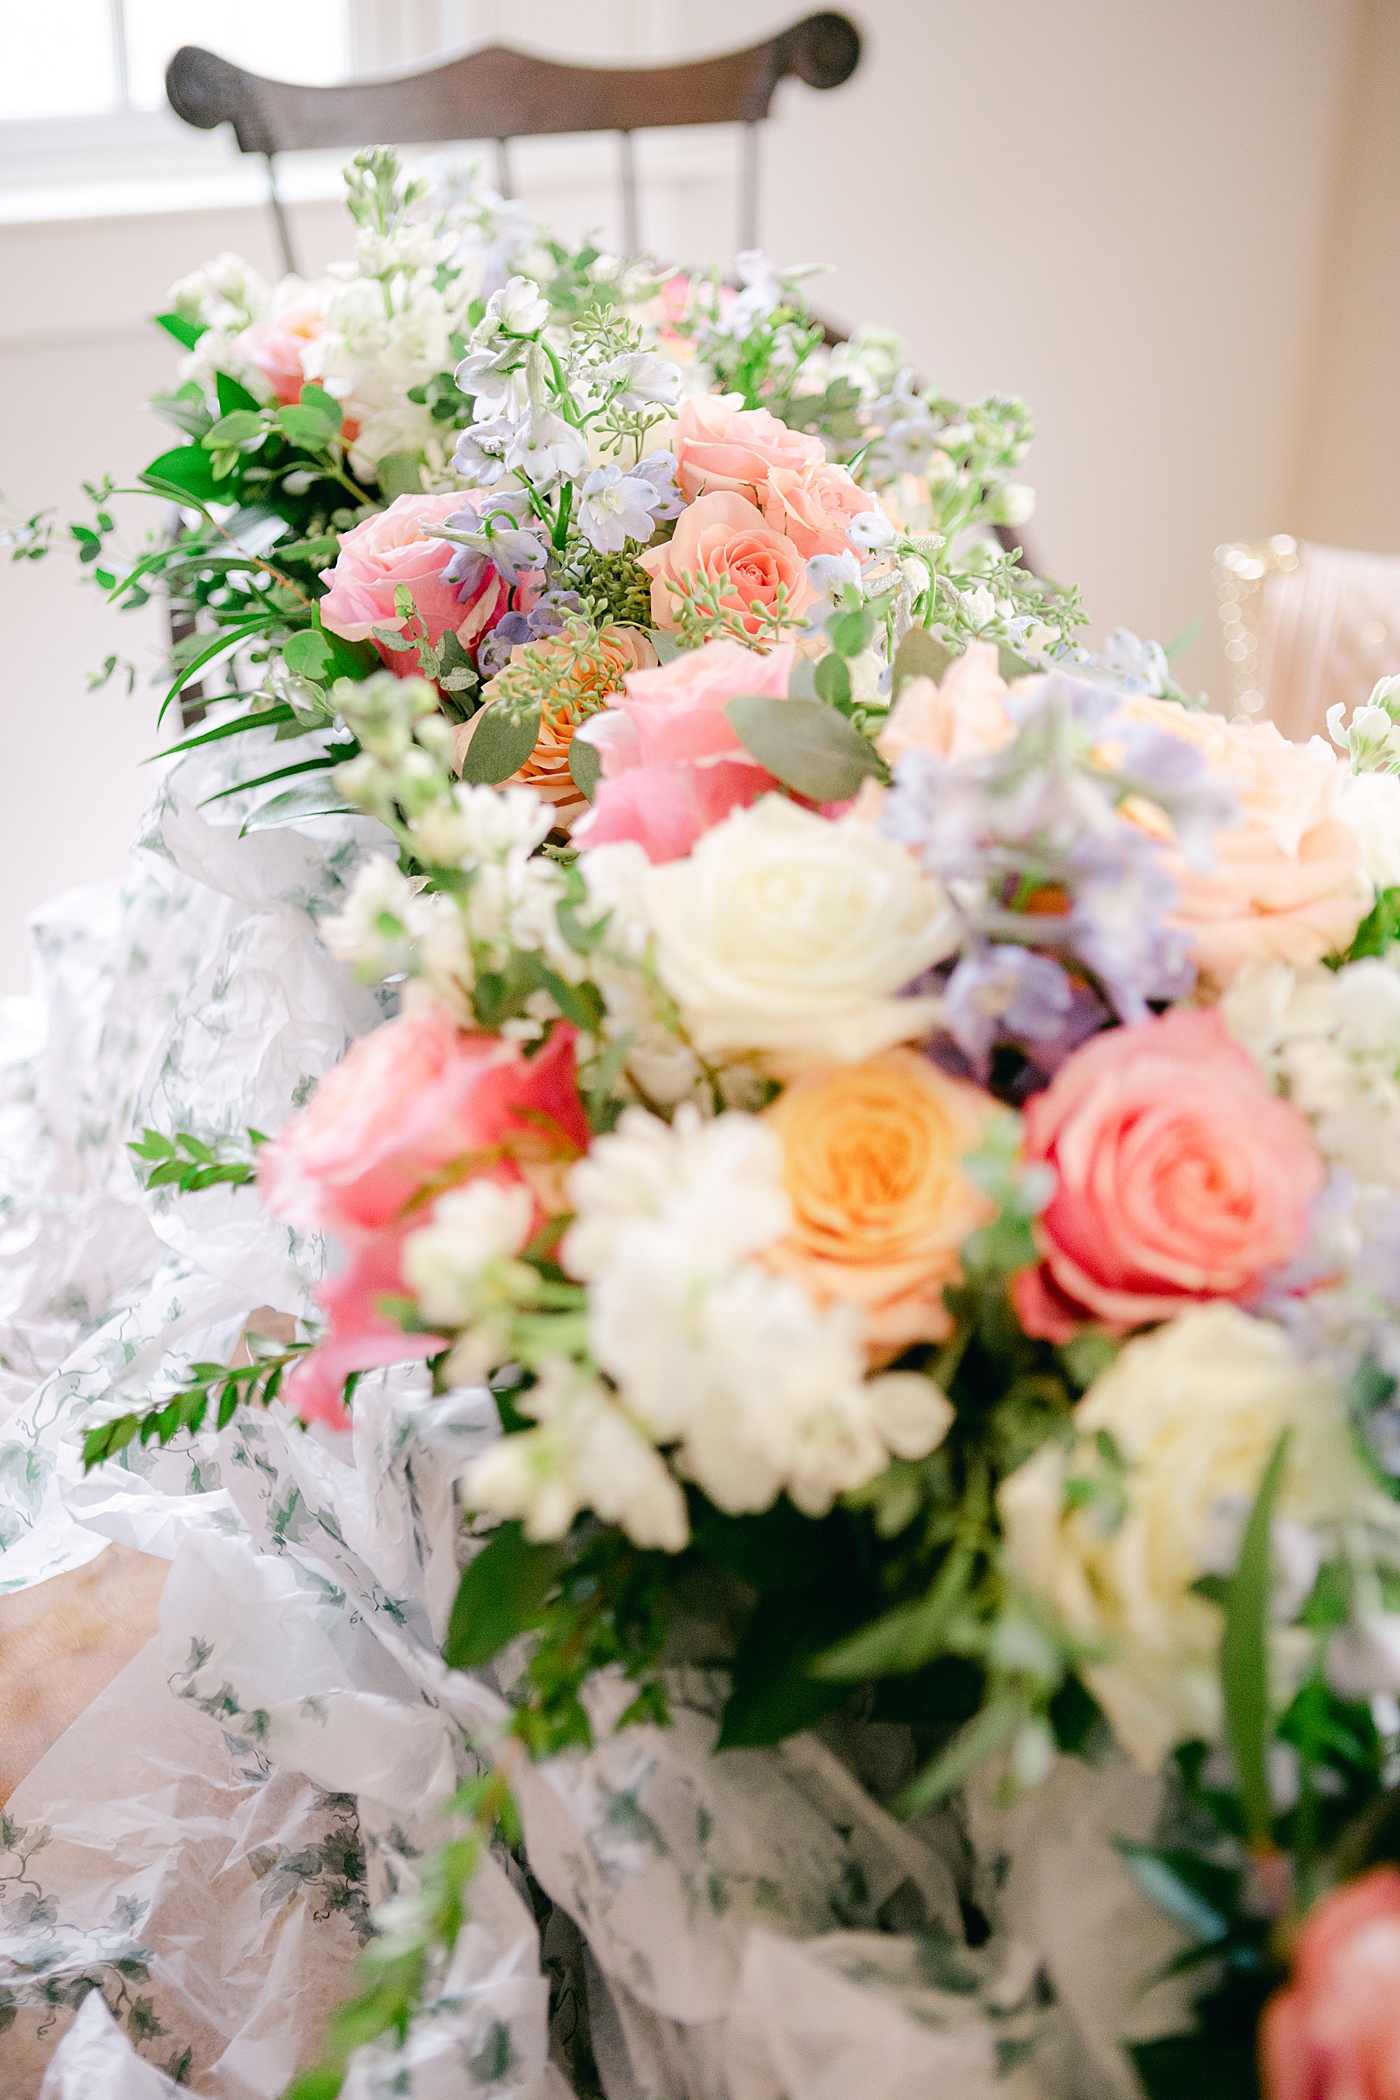 Wedding flowers on a table | Image by Hudson Valley Wedding Photographer Hope Helmuth